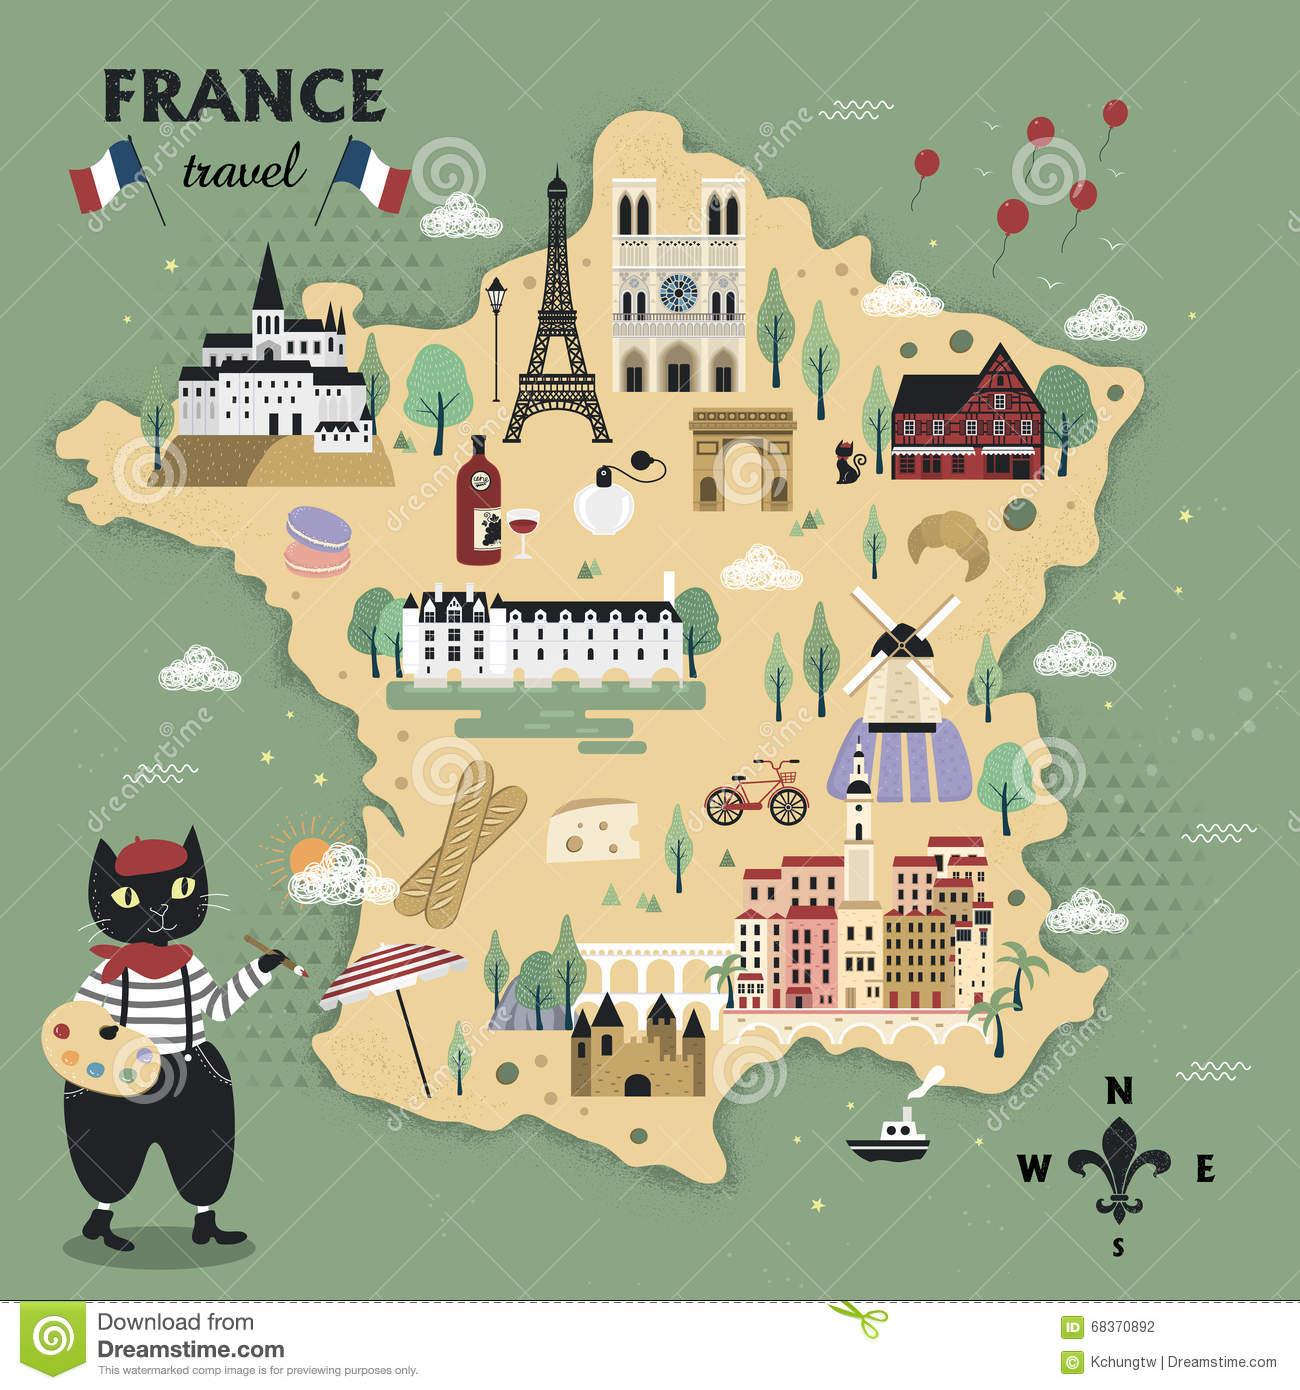 tourism in france by country